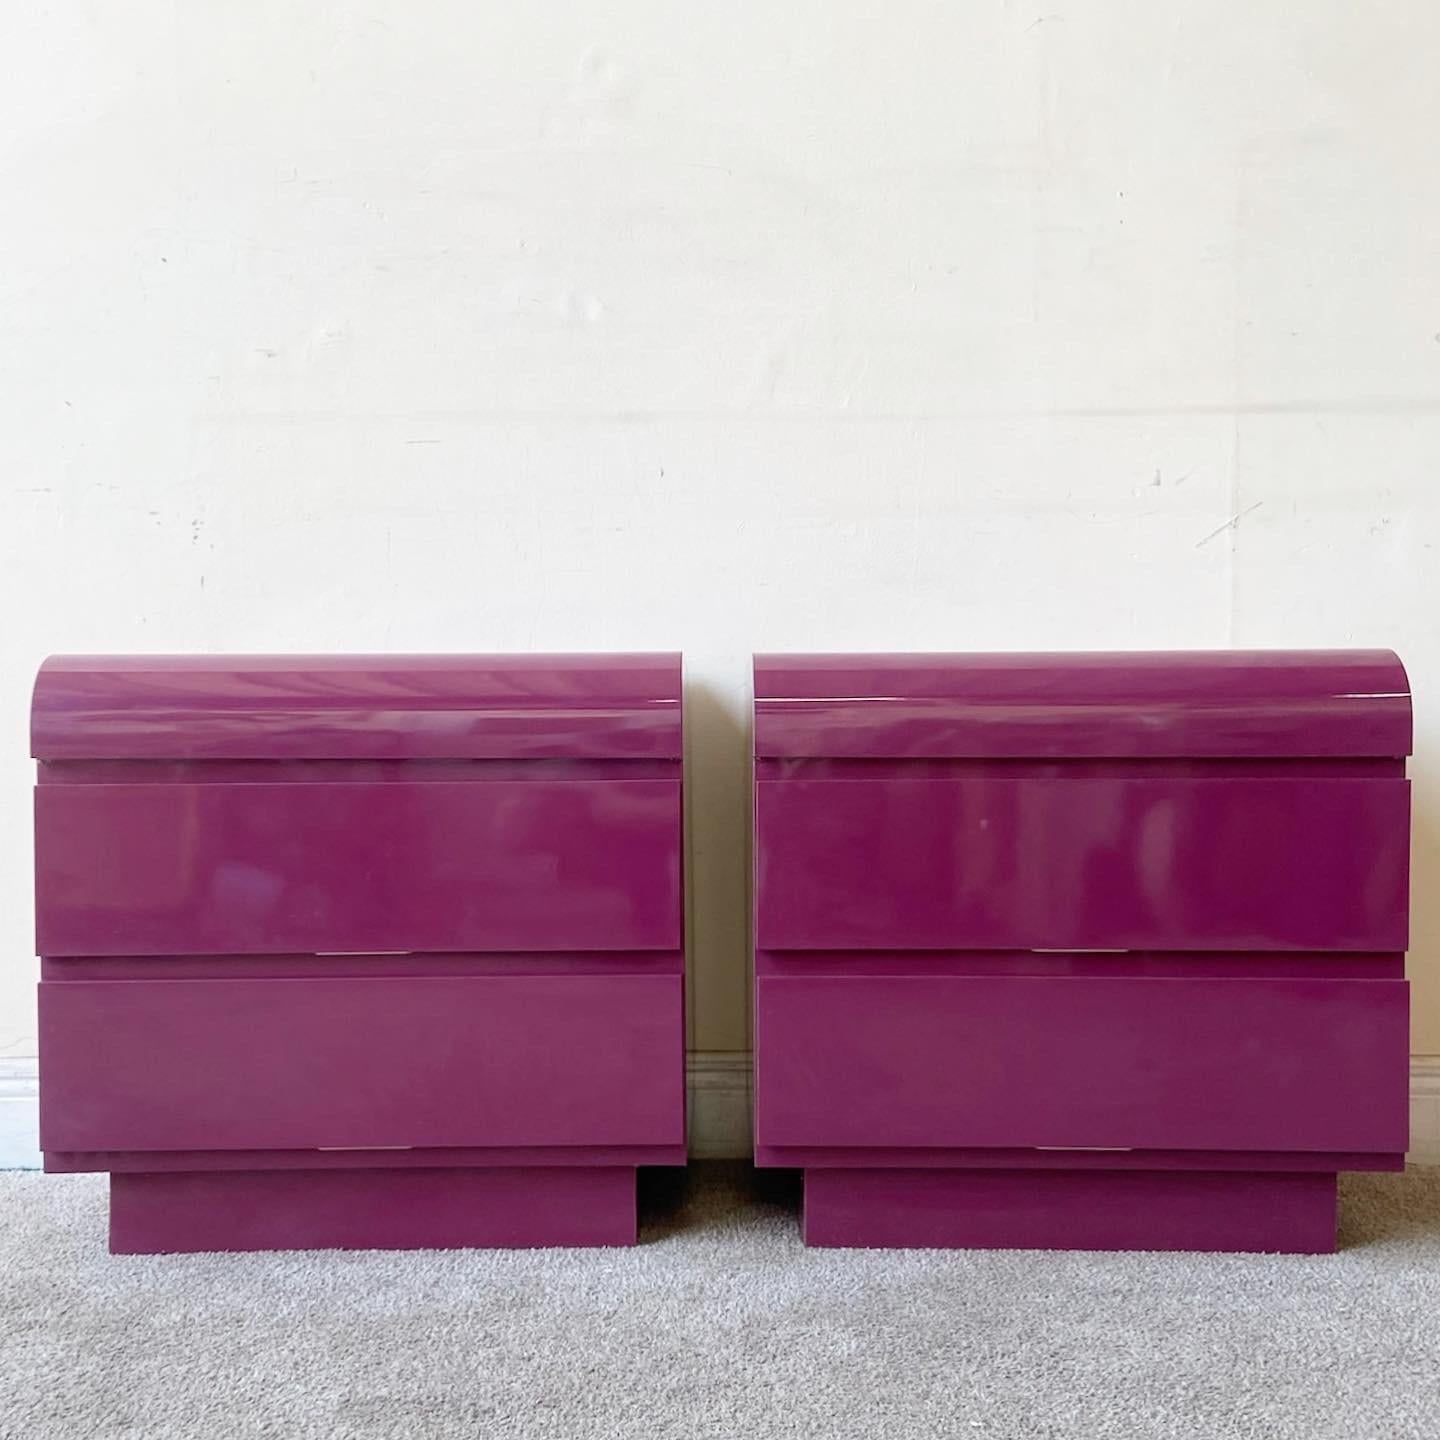 Exceptional postmodern waterfall nightstands. Each feature a purple lacquer laminate with two spacious drawers.
  